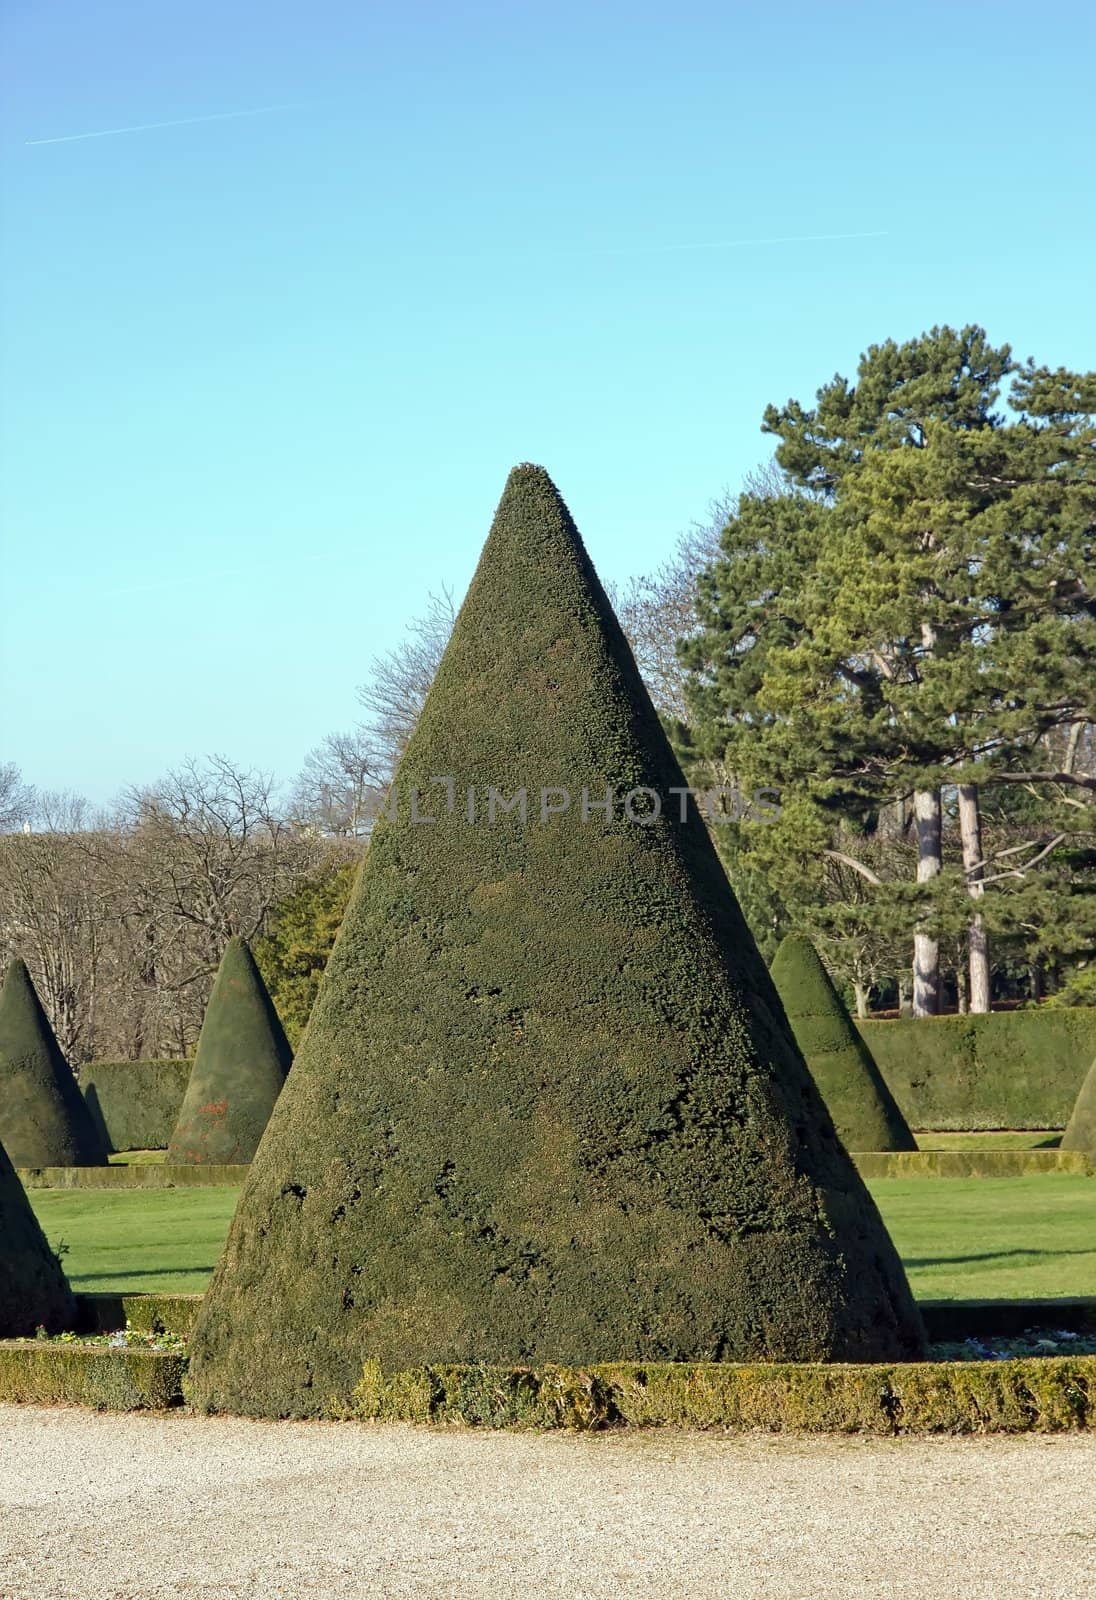 shrubs trimmed into a cone, French garden detail by neko92vl